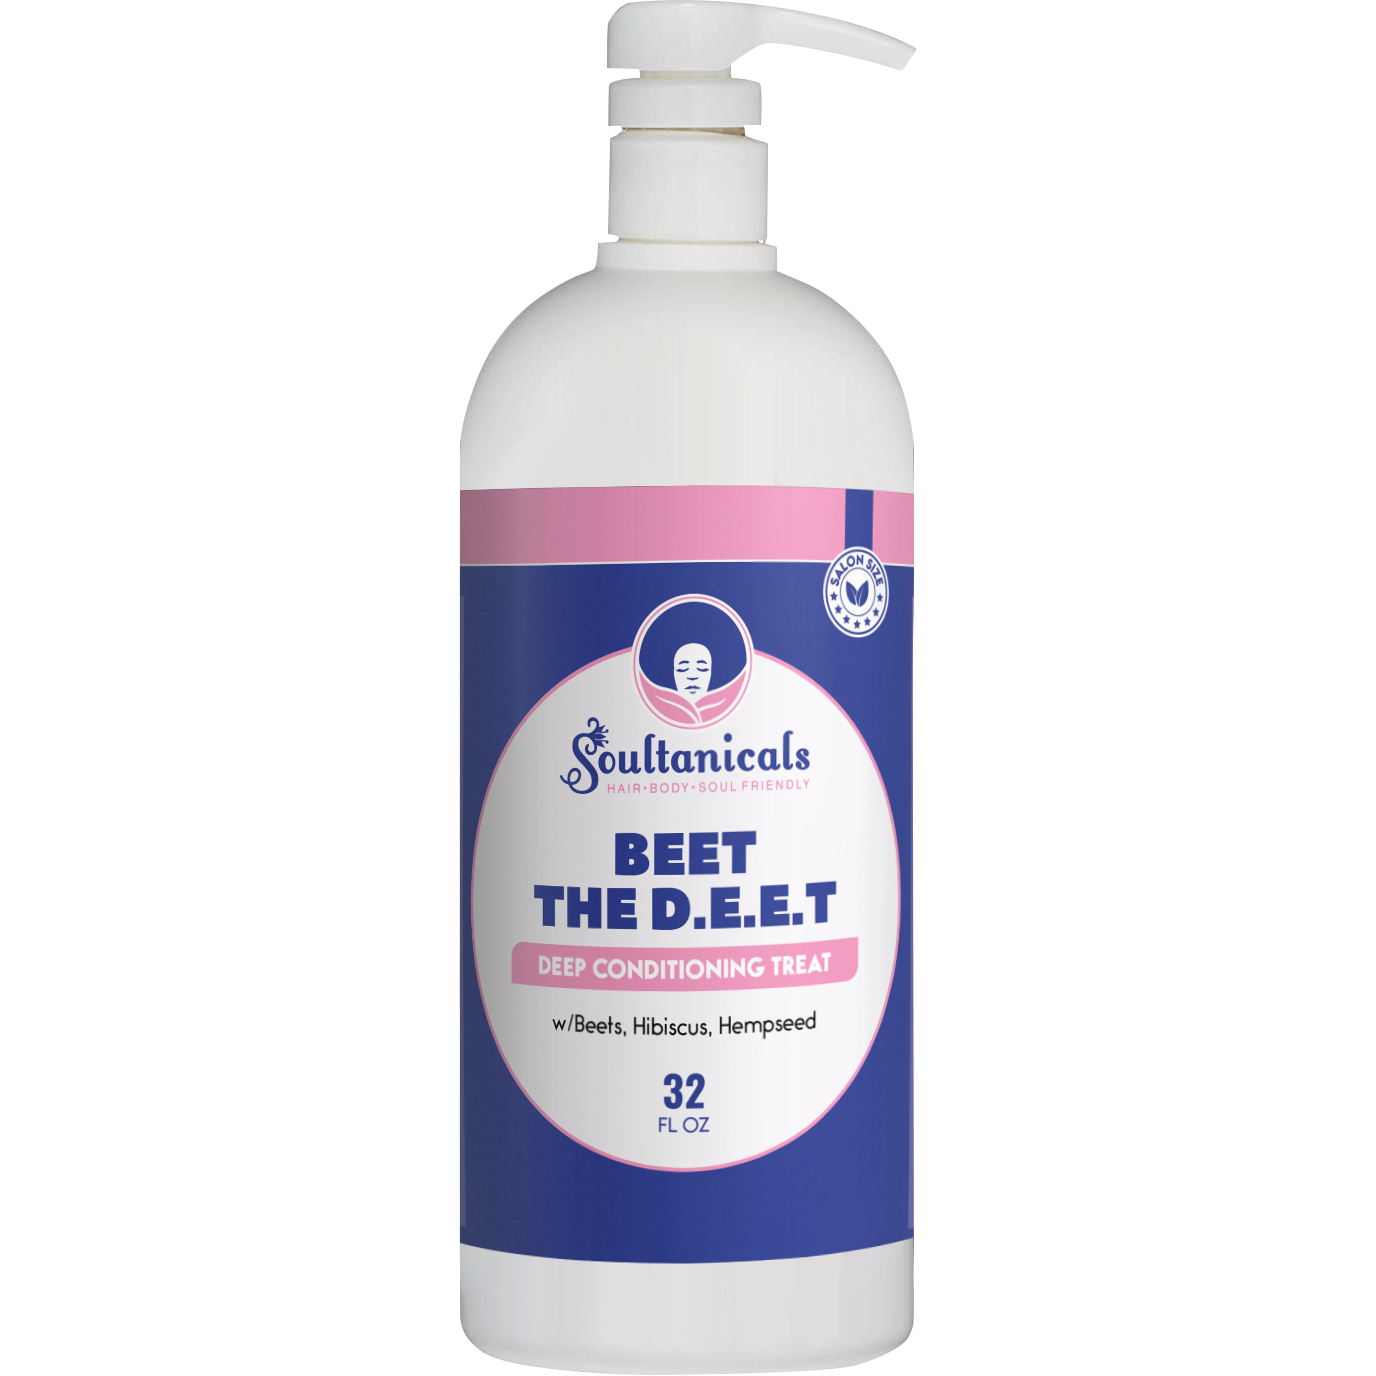 BEET THE D.E.E.T- Deep Conditioning Treat SALON SIZE (Ships By 5/24)